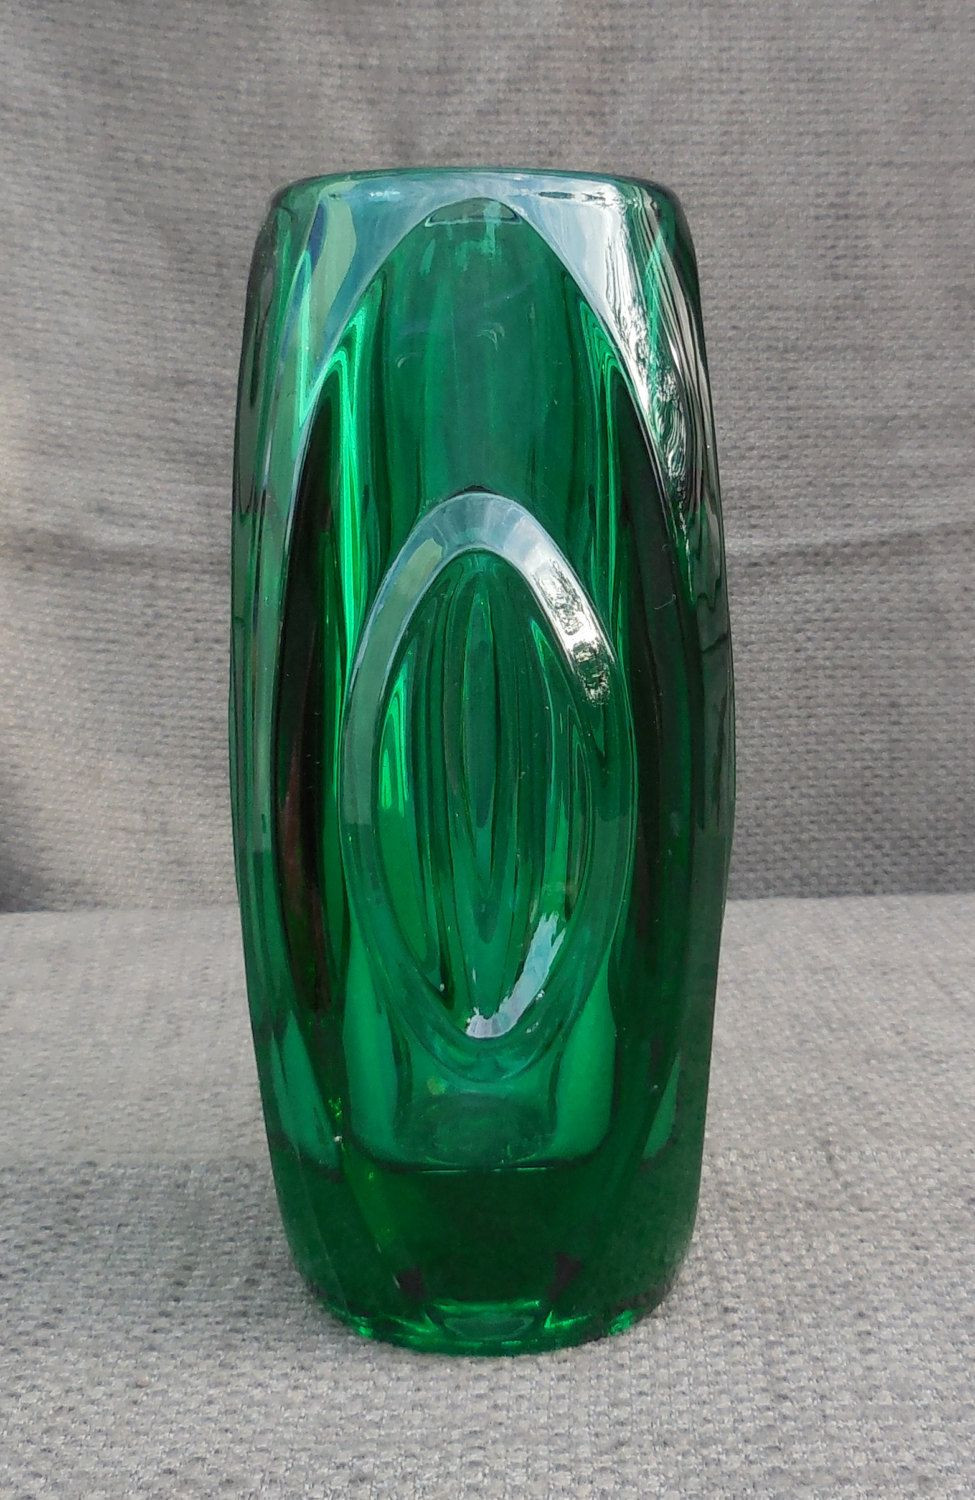 21 Awesome Vintage Glass Vases for Sale 2024 free download vintage glass vases for sale of stunning 1950s vintage rosice czech lens green art glass vase by in stunning 1950s vintage rosice czech lens green art glass vase by rudolph schrotter